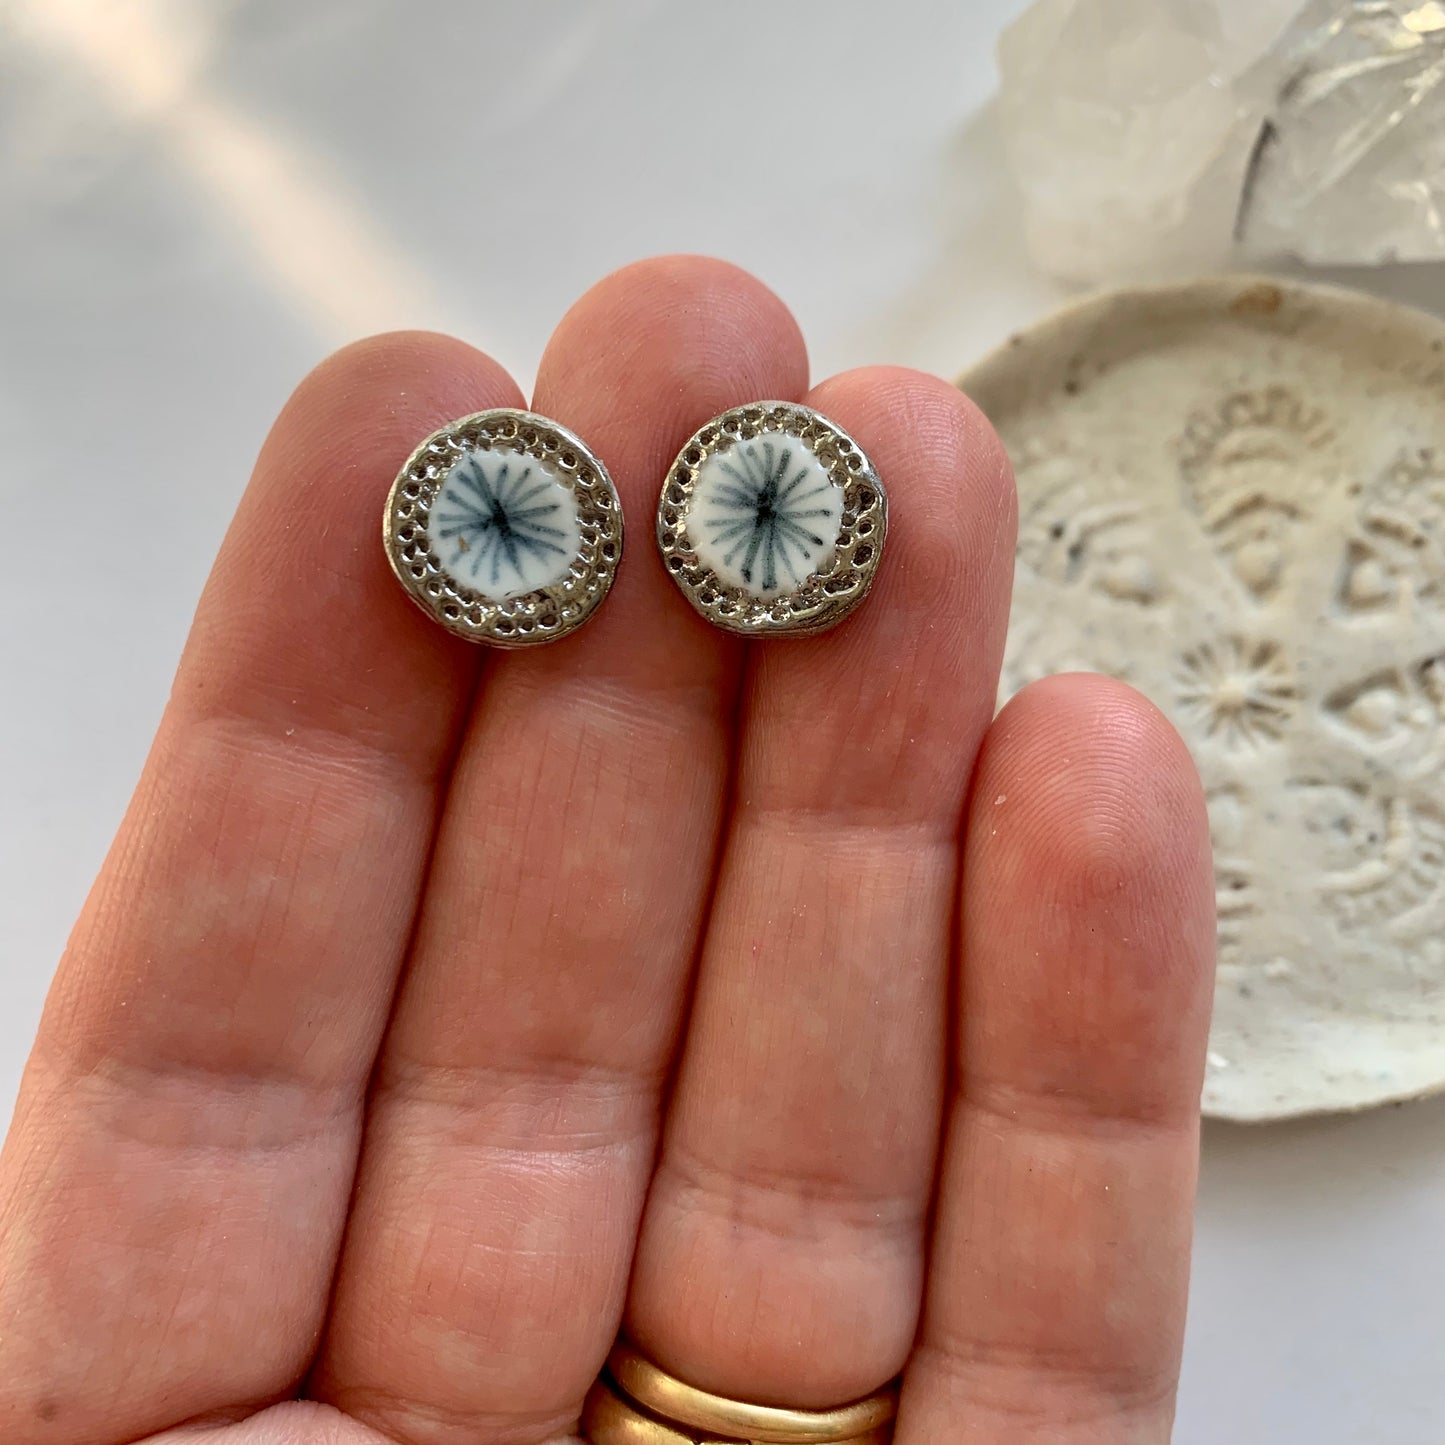 One pair of porcelain studs, blues